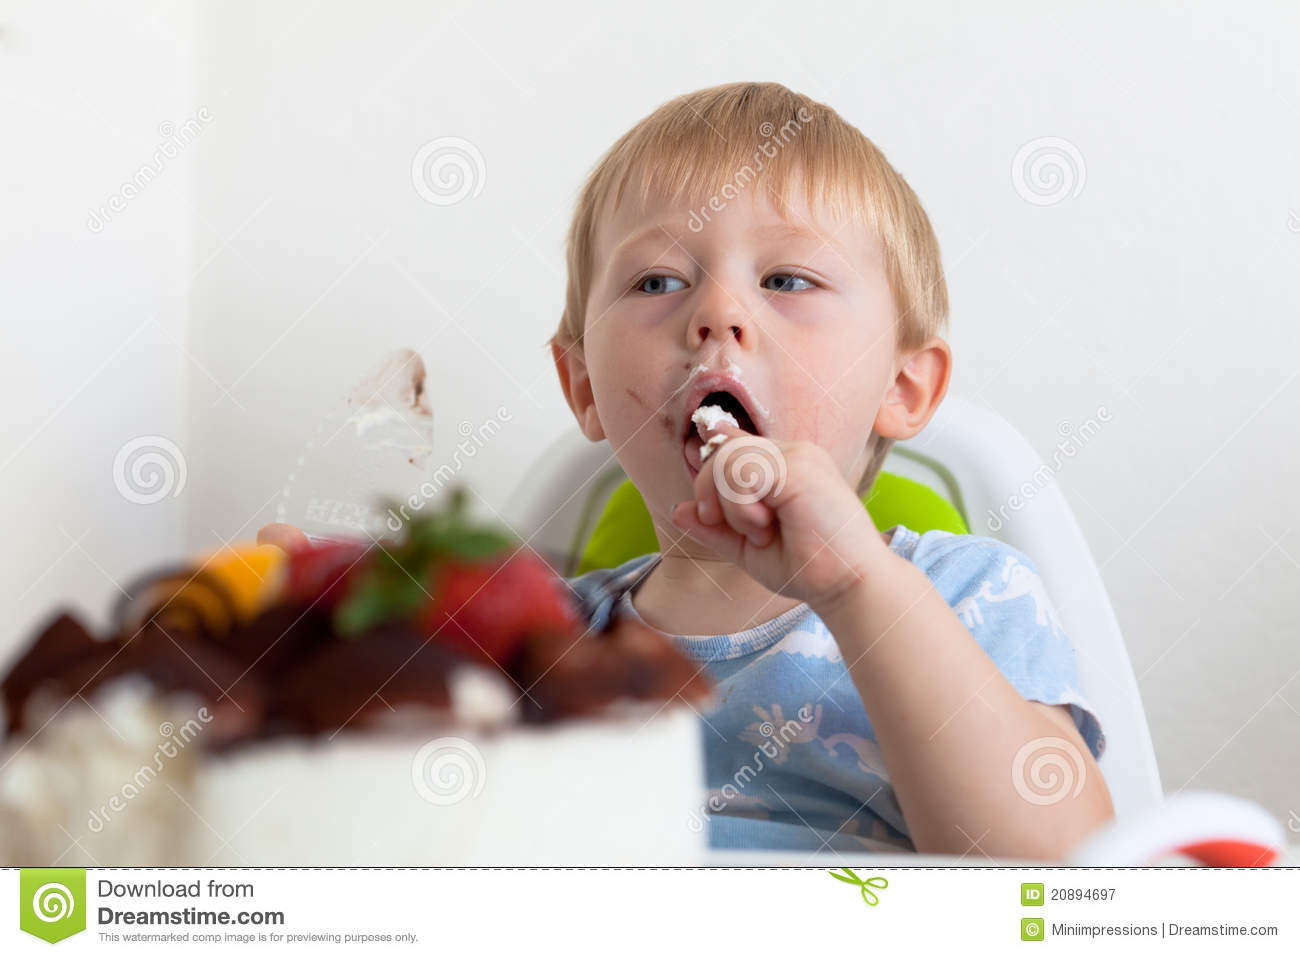 Adorable Toddler Eating Cake Royalty Free Stock Photography   Image    